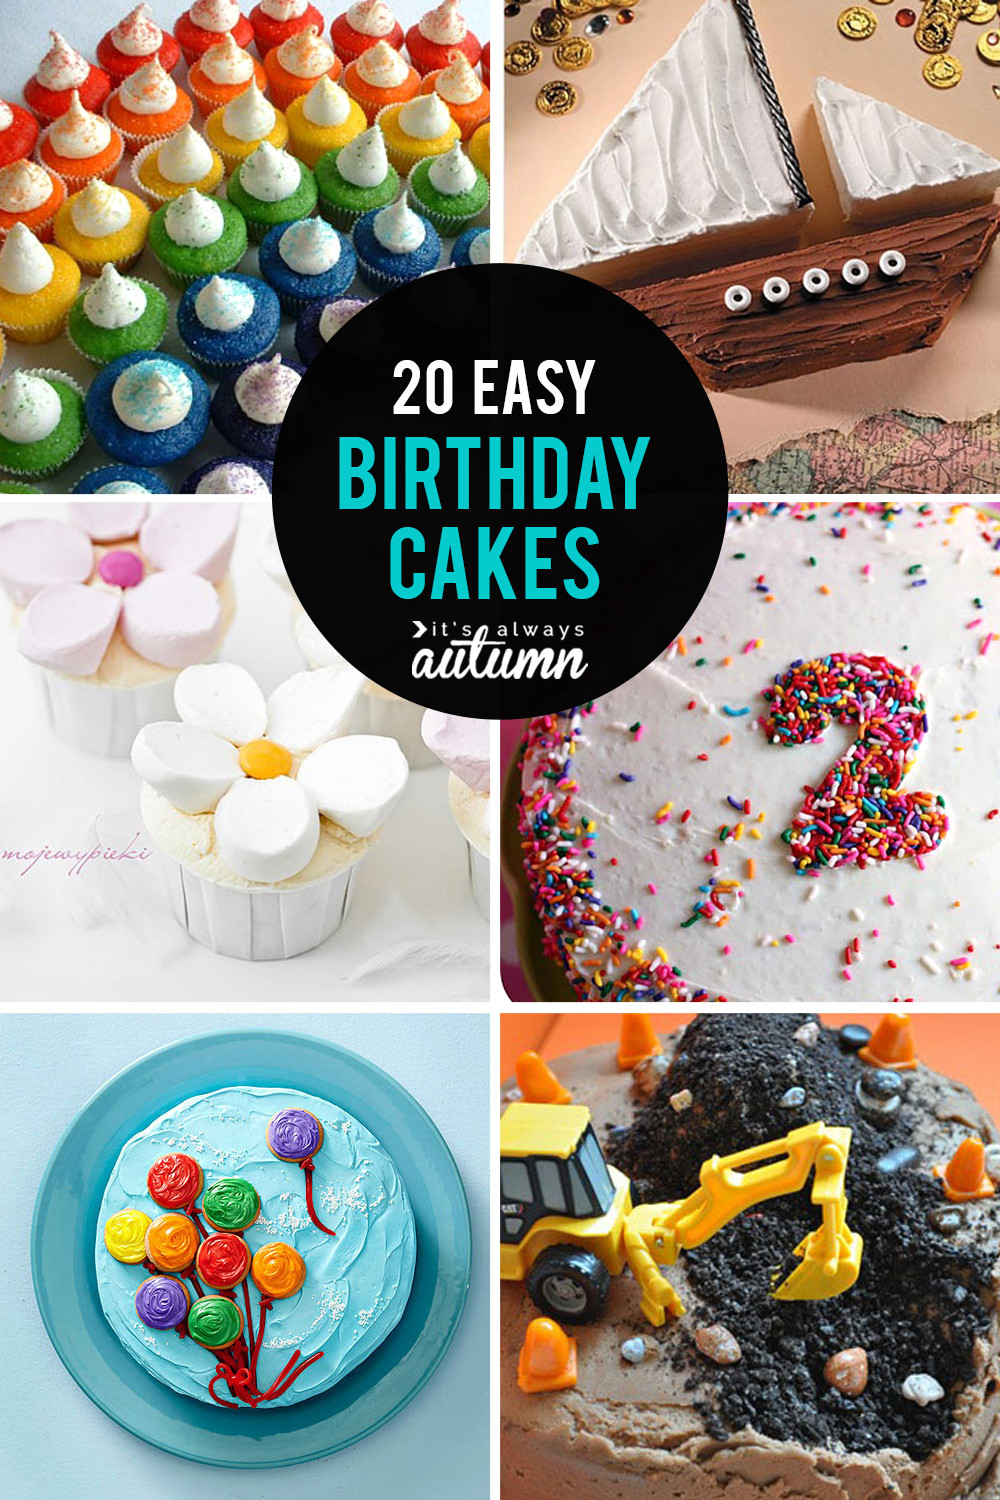 Easy Birthday Cake Decorating Ideas
 20 easy birthday cakes that anyone can decorate It s